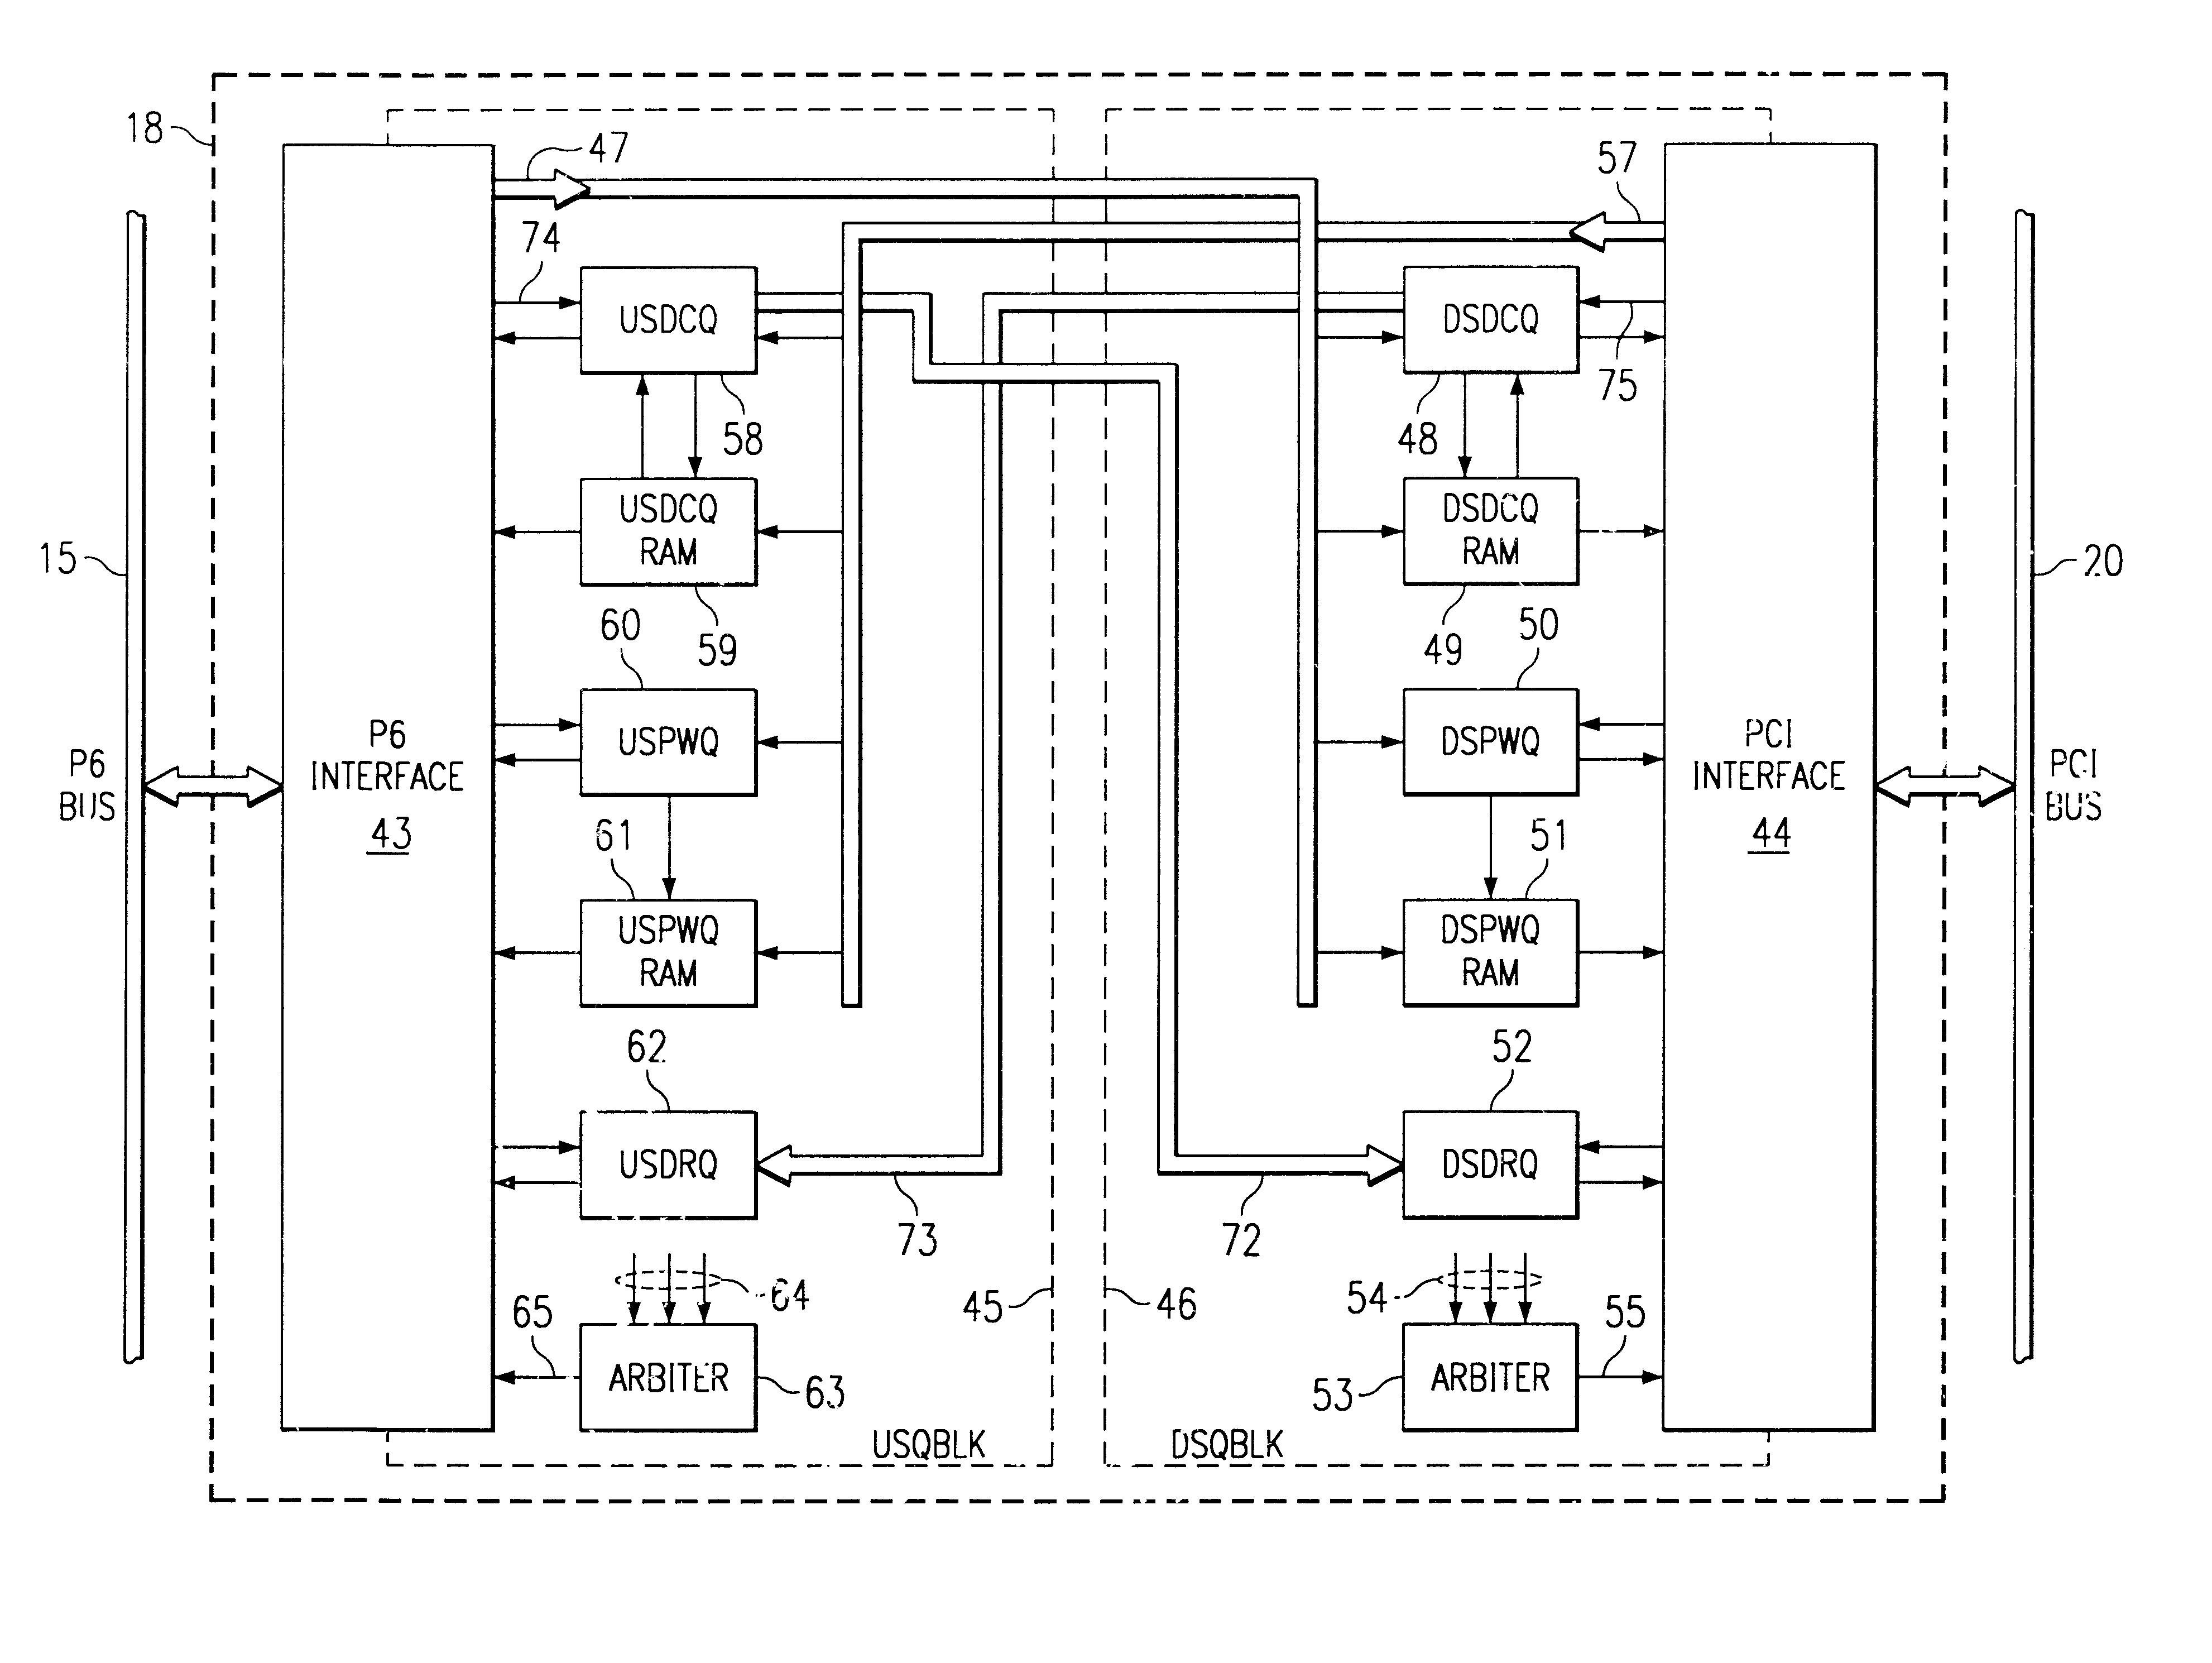 Bus-to-bus bridge in computer system, with fast burst memory range